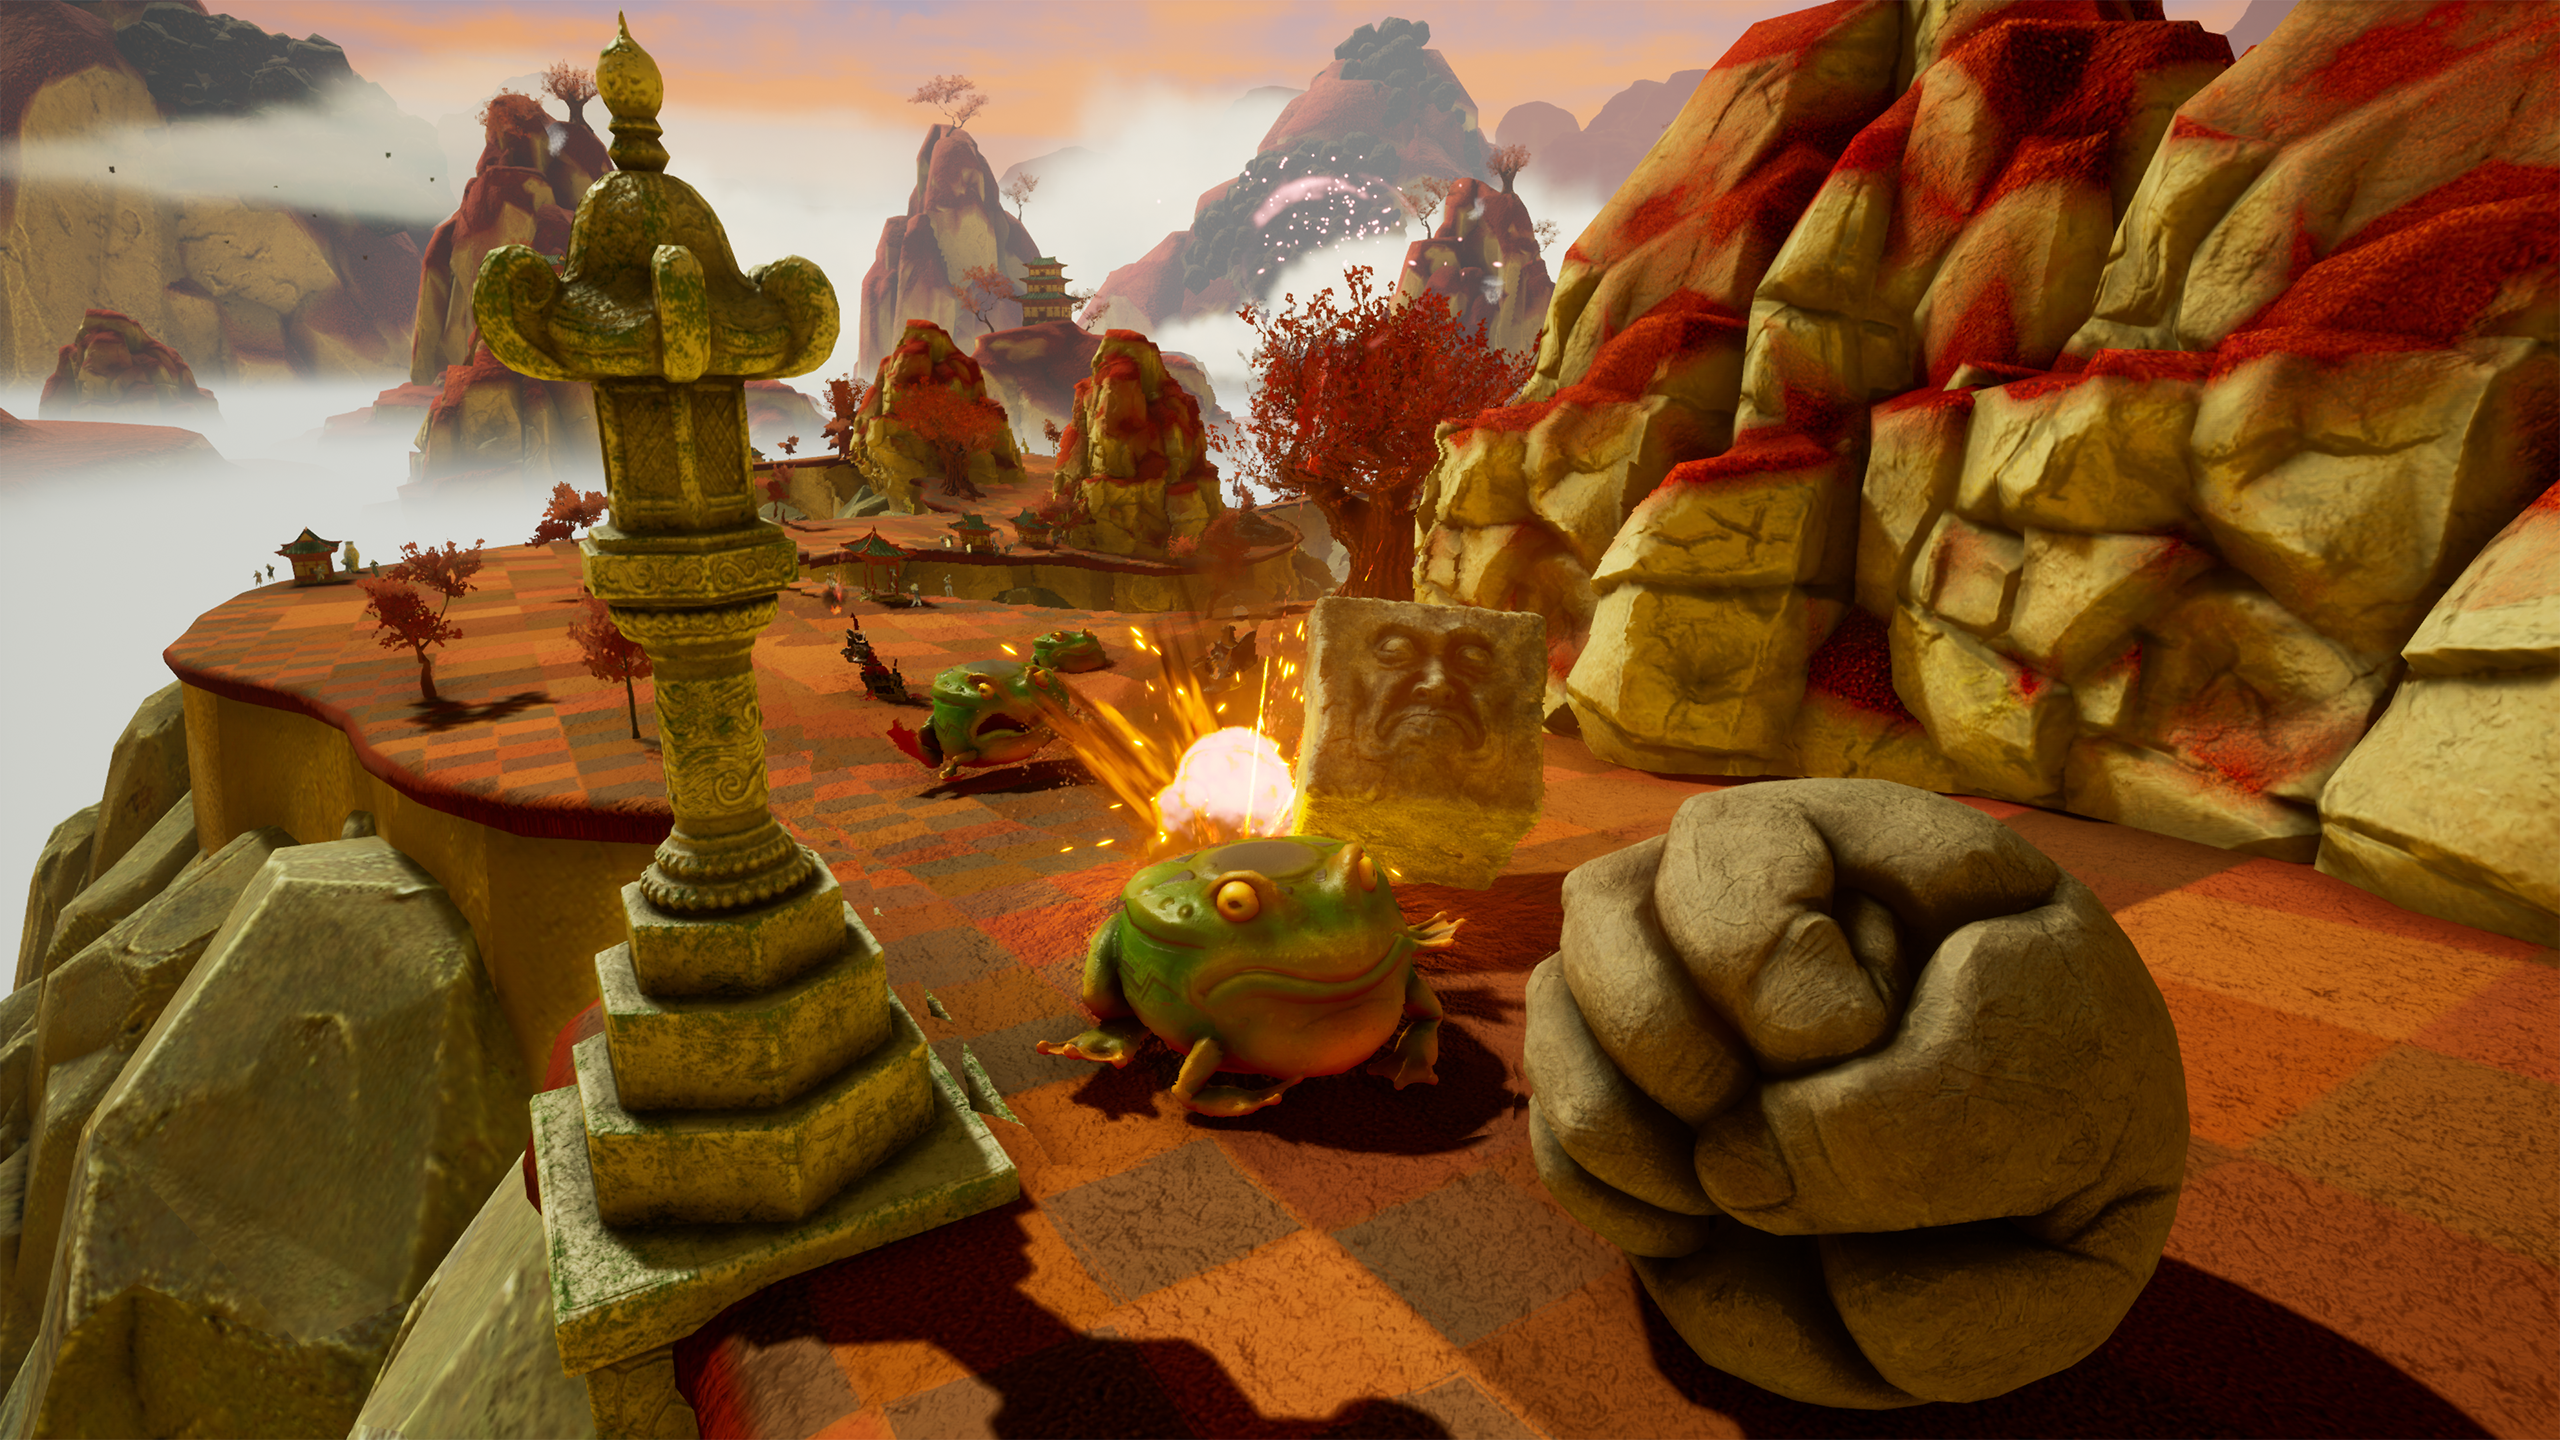 Players can build and run crazy obstacle courses and push their boulder to the finish line in Rock of Ages 3: Make &amp; Break